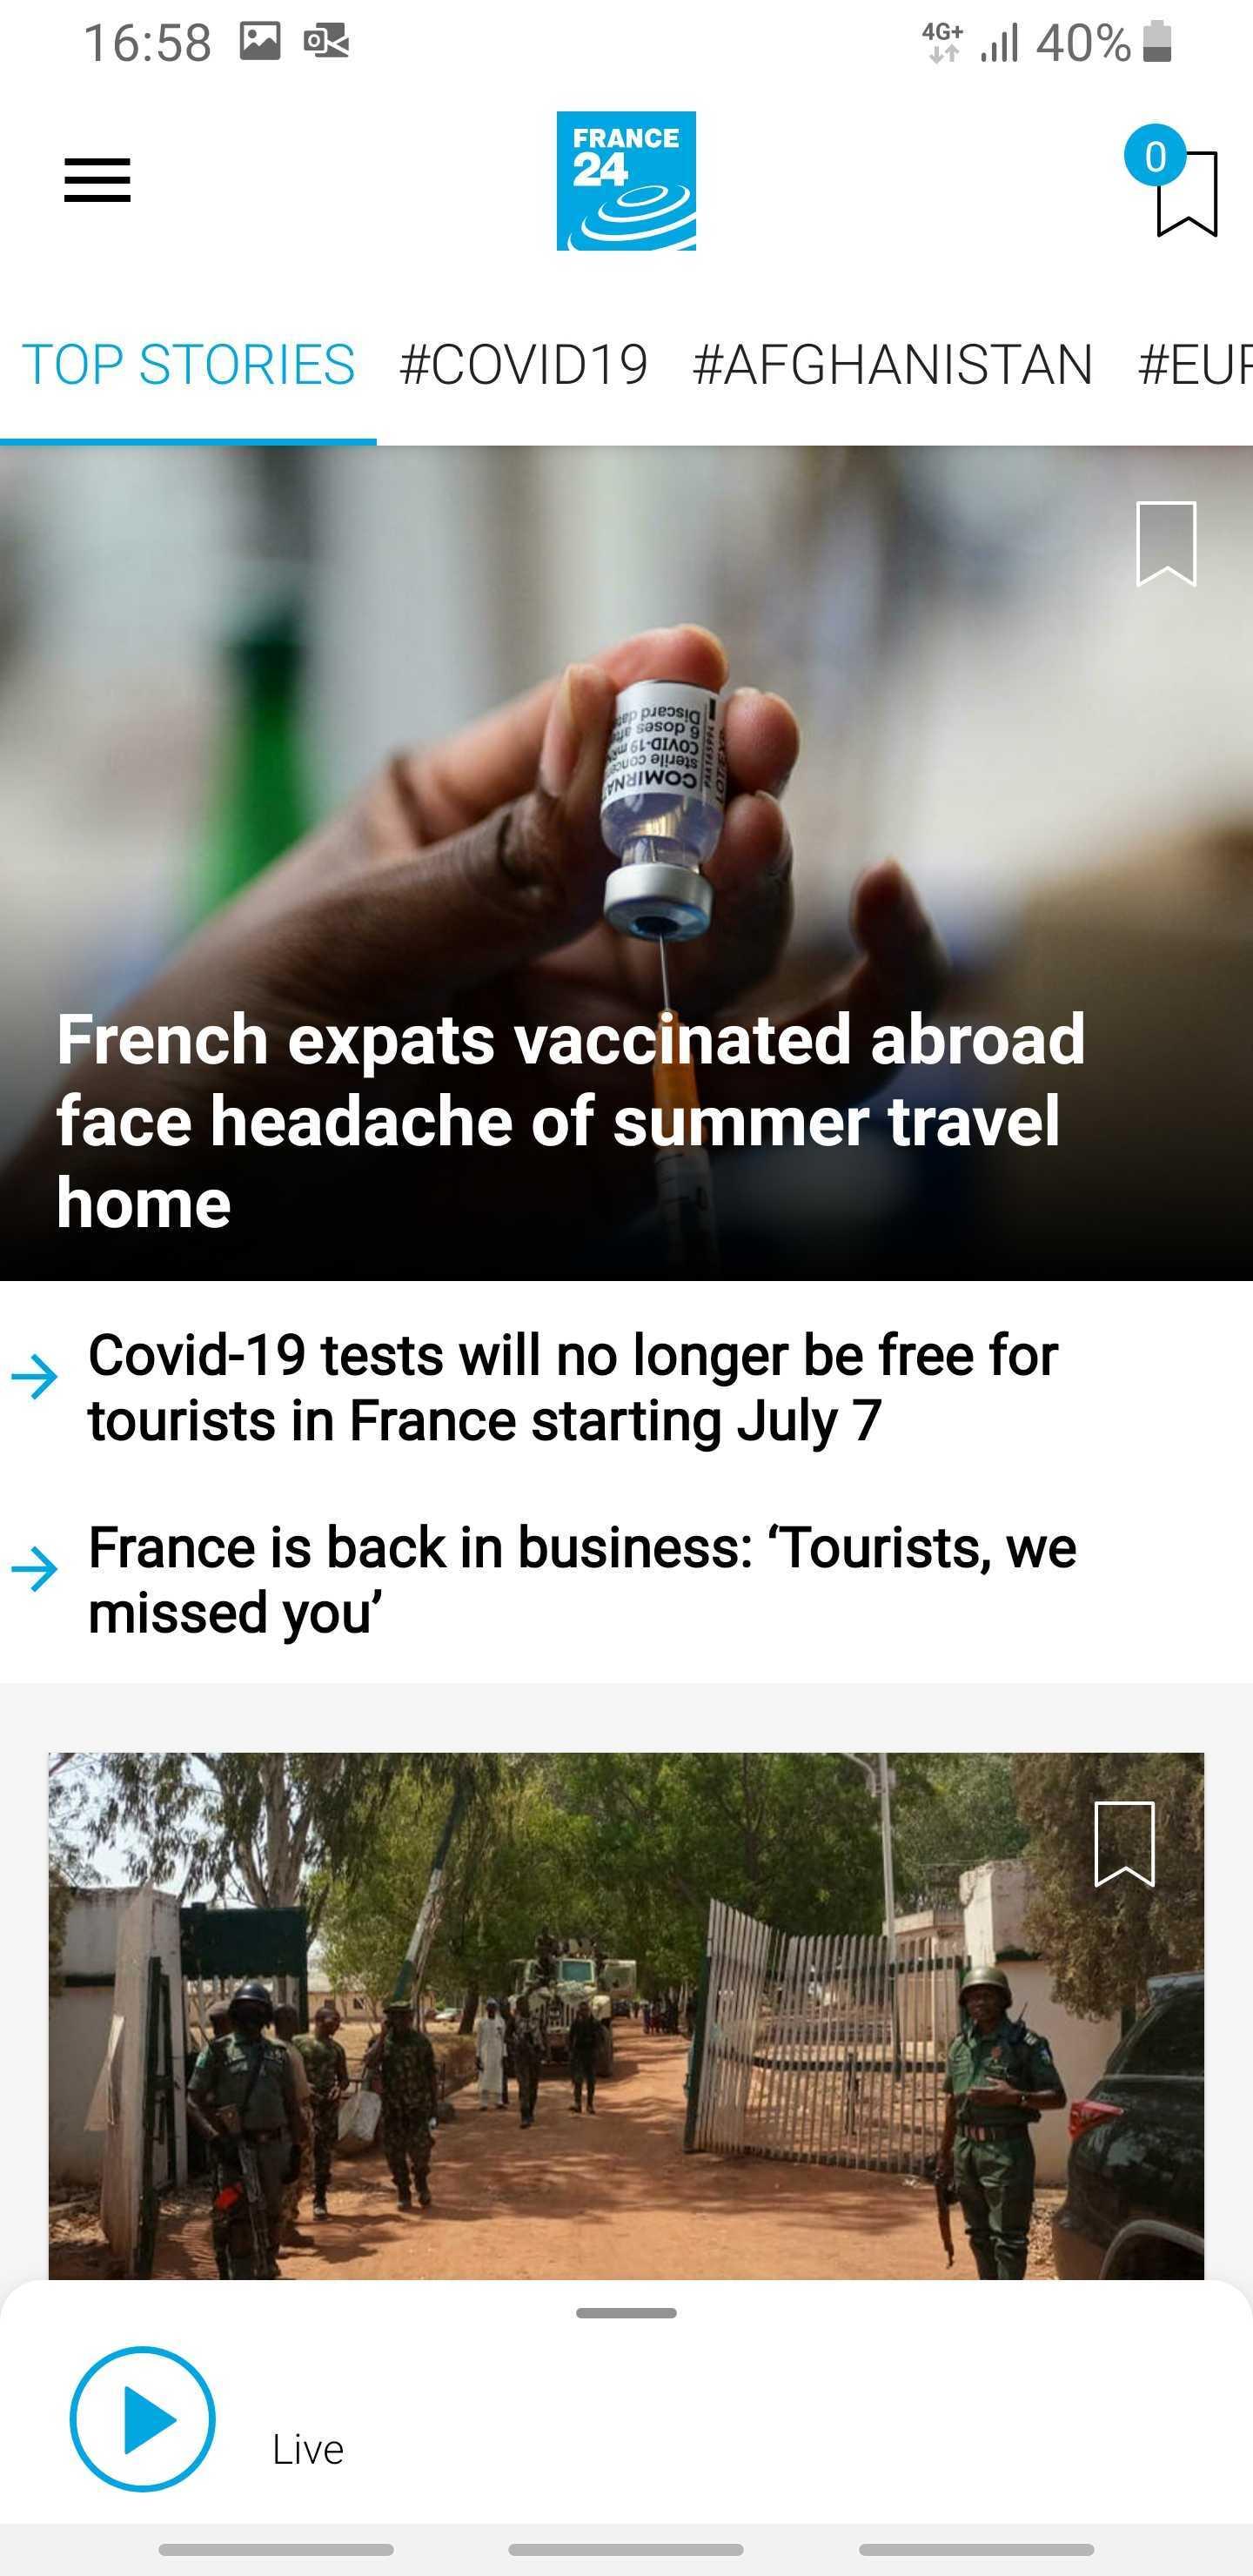 FRANCE 24 for Android - APK Download